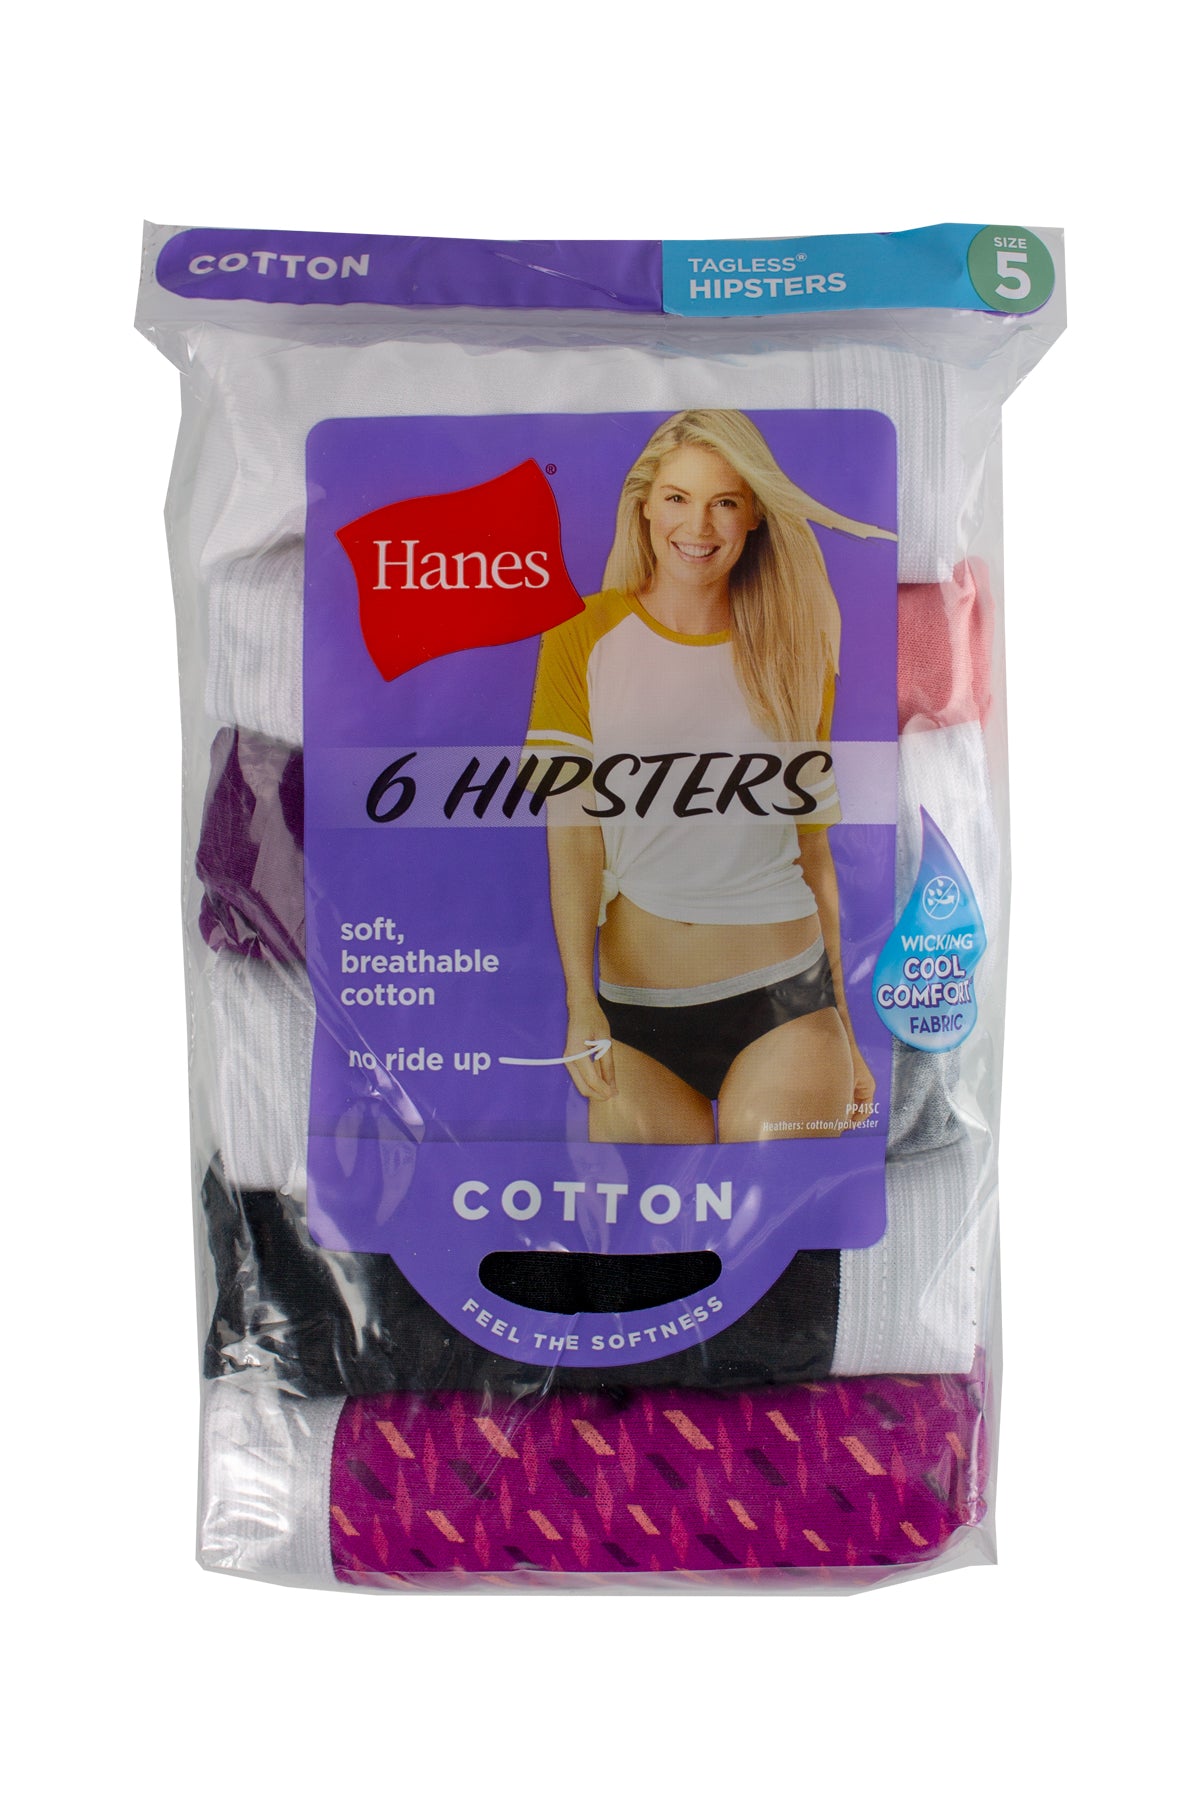 hanes hipsters size 8